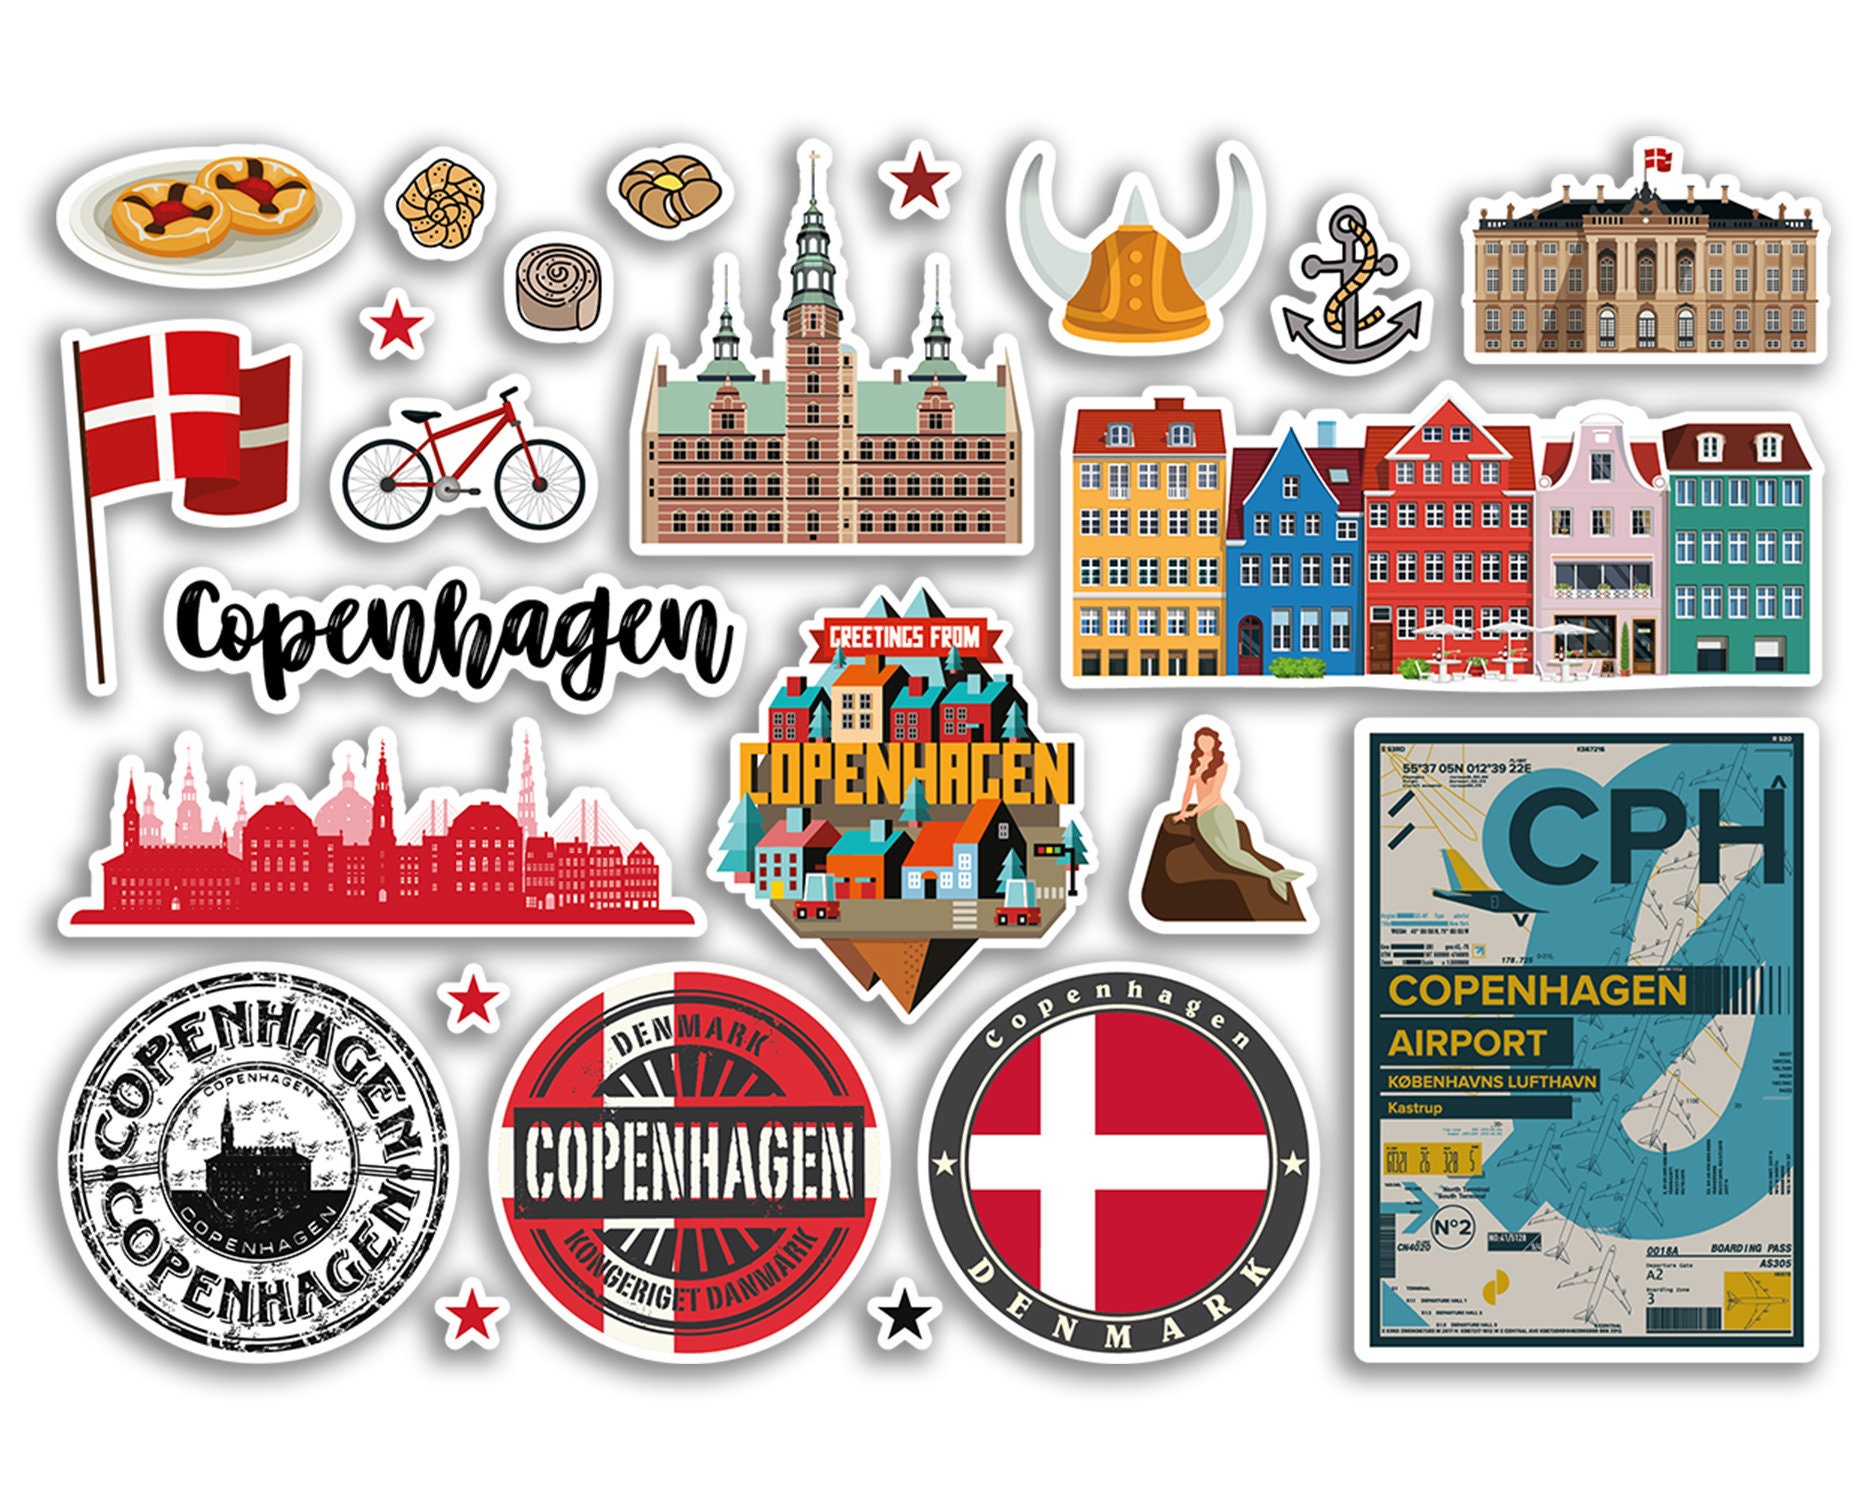 Buy glossy printable sticker Online in Denmark at Low Prices at desertcart